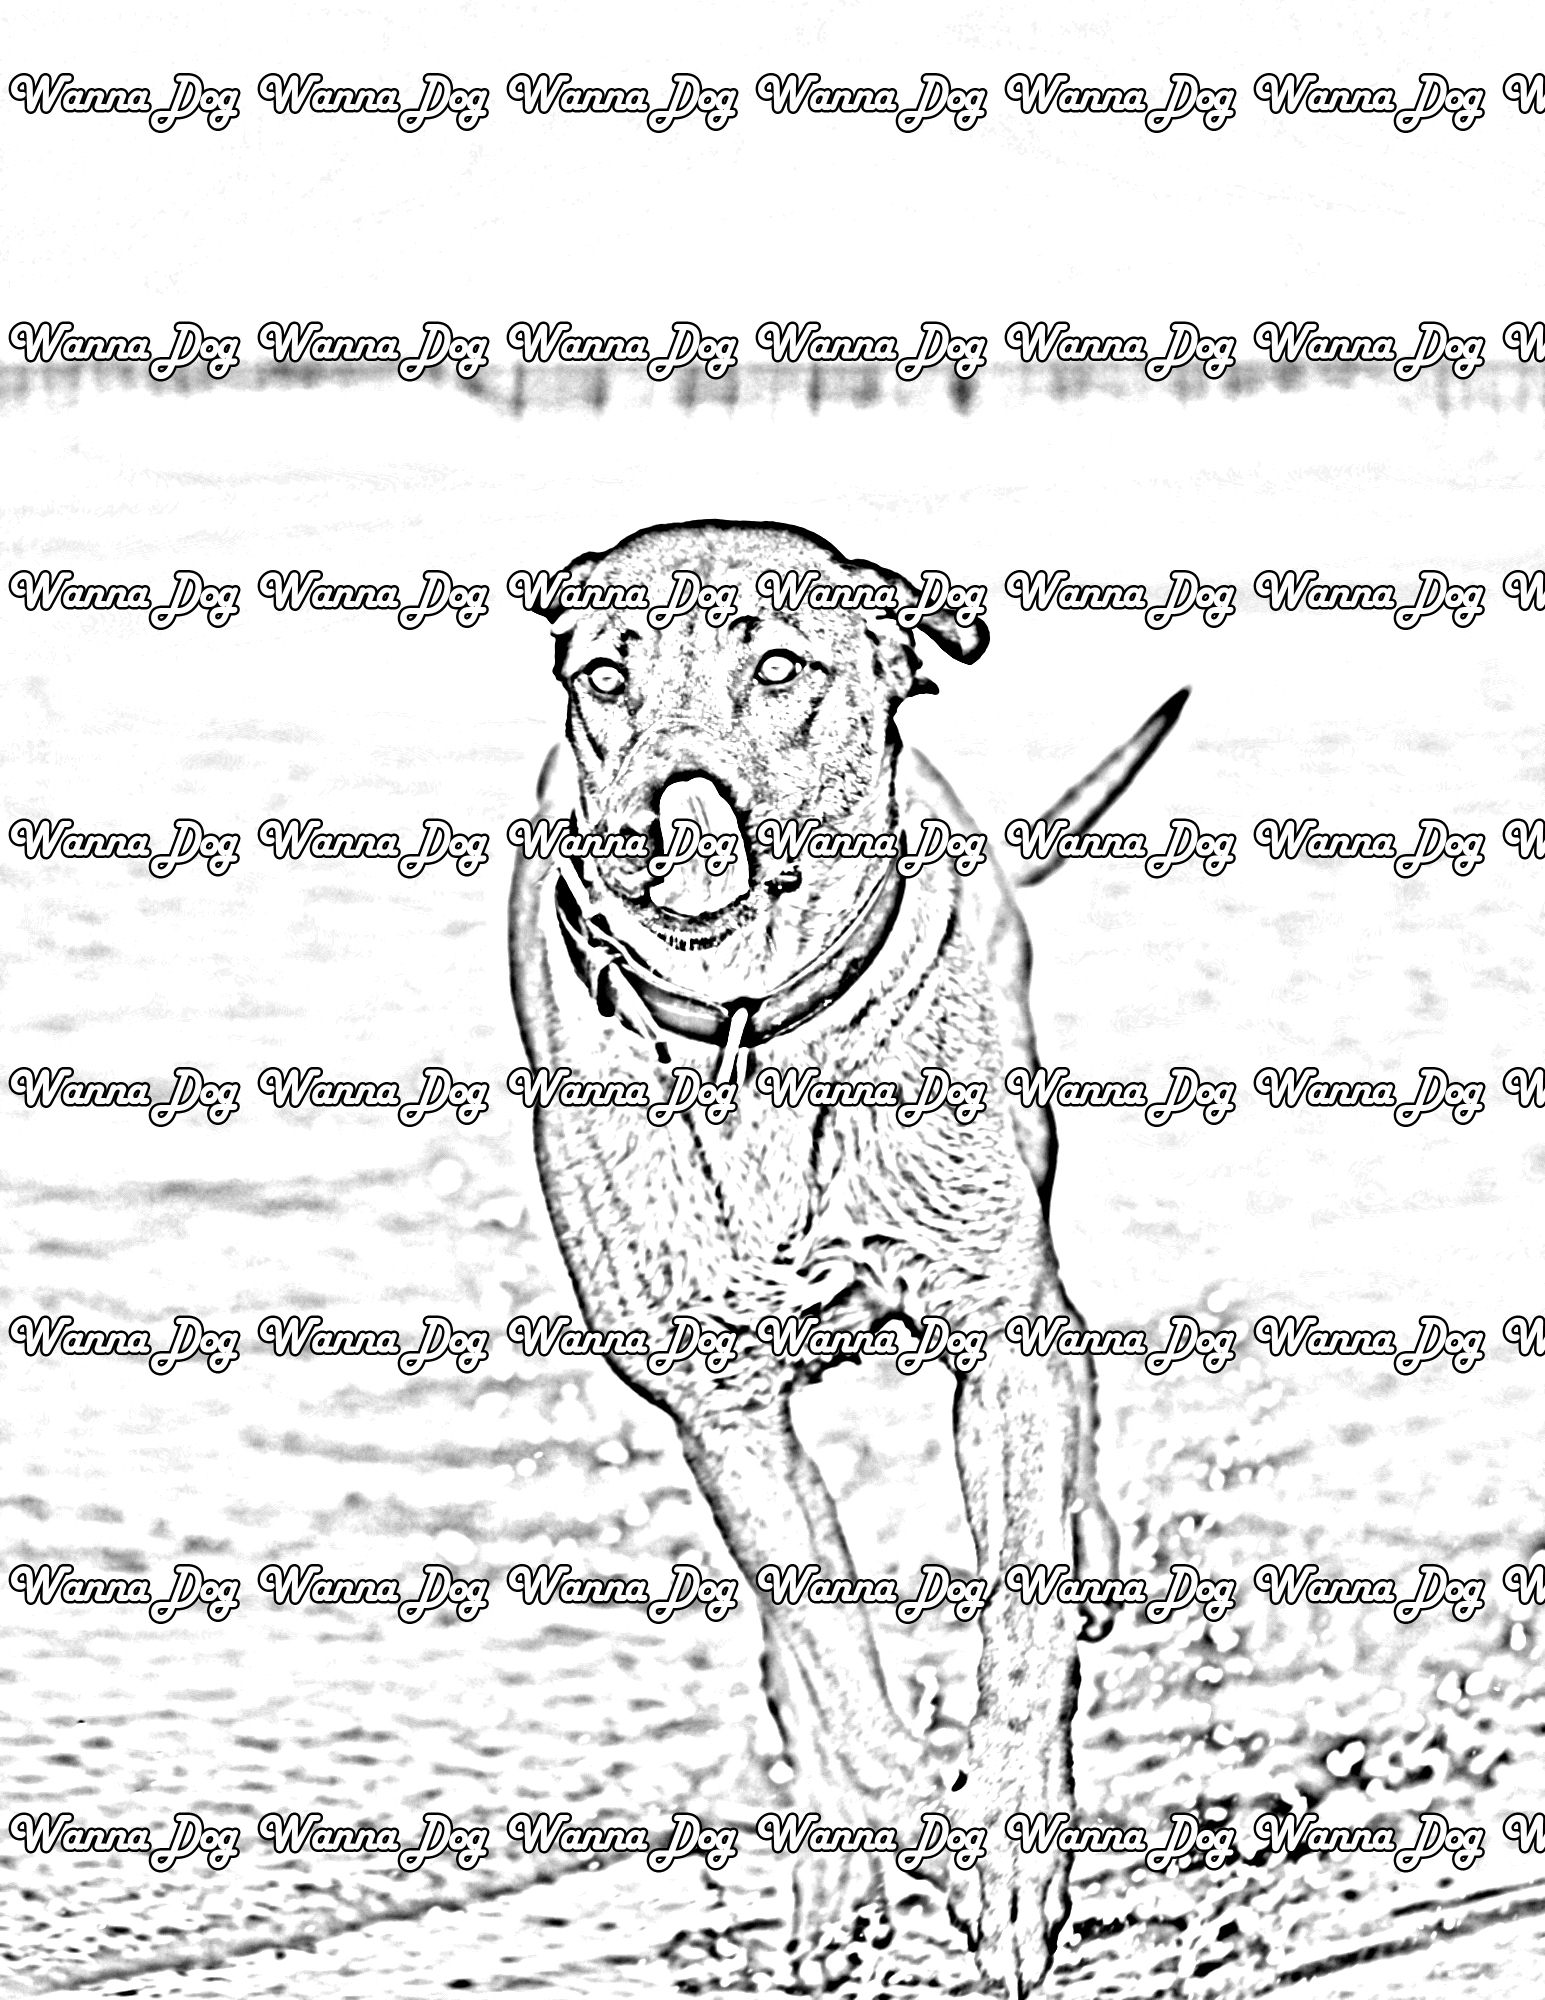 Rhodesian Ridgeback Coloring Page of a Rhodesian Ridgeback running on a beach with their tongue out